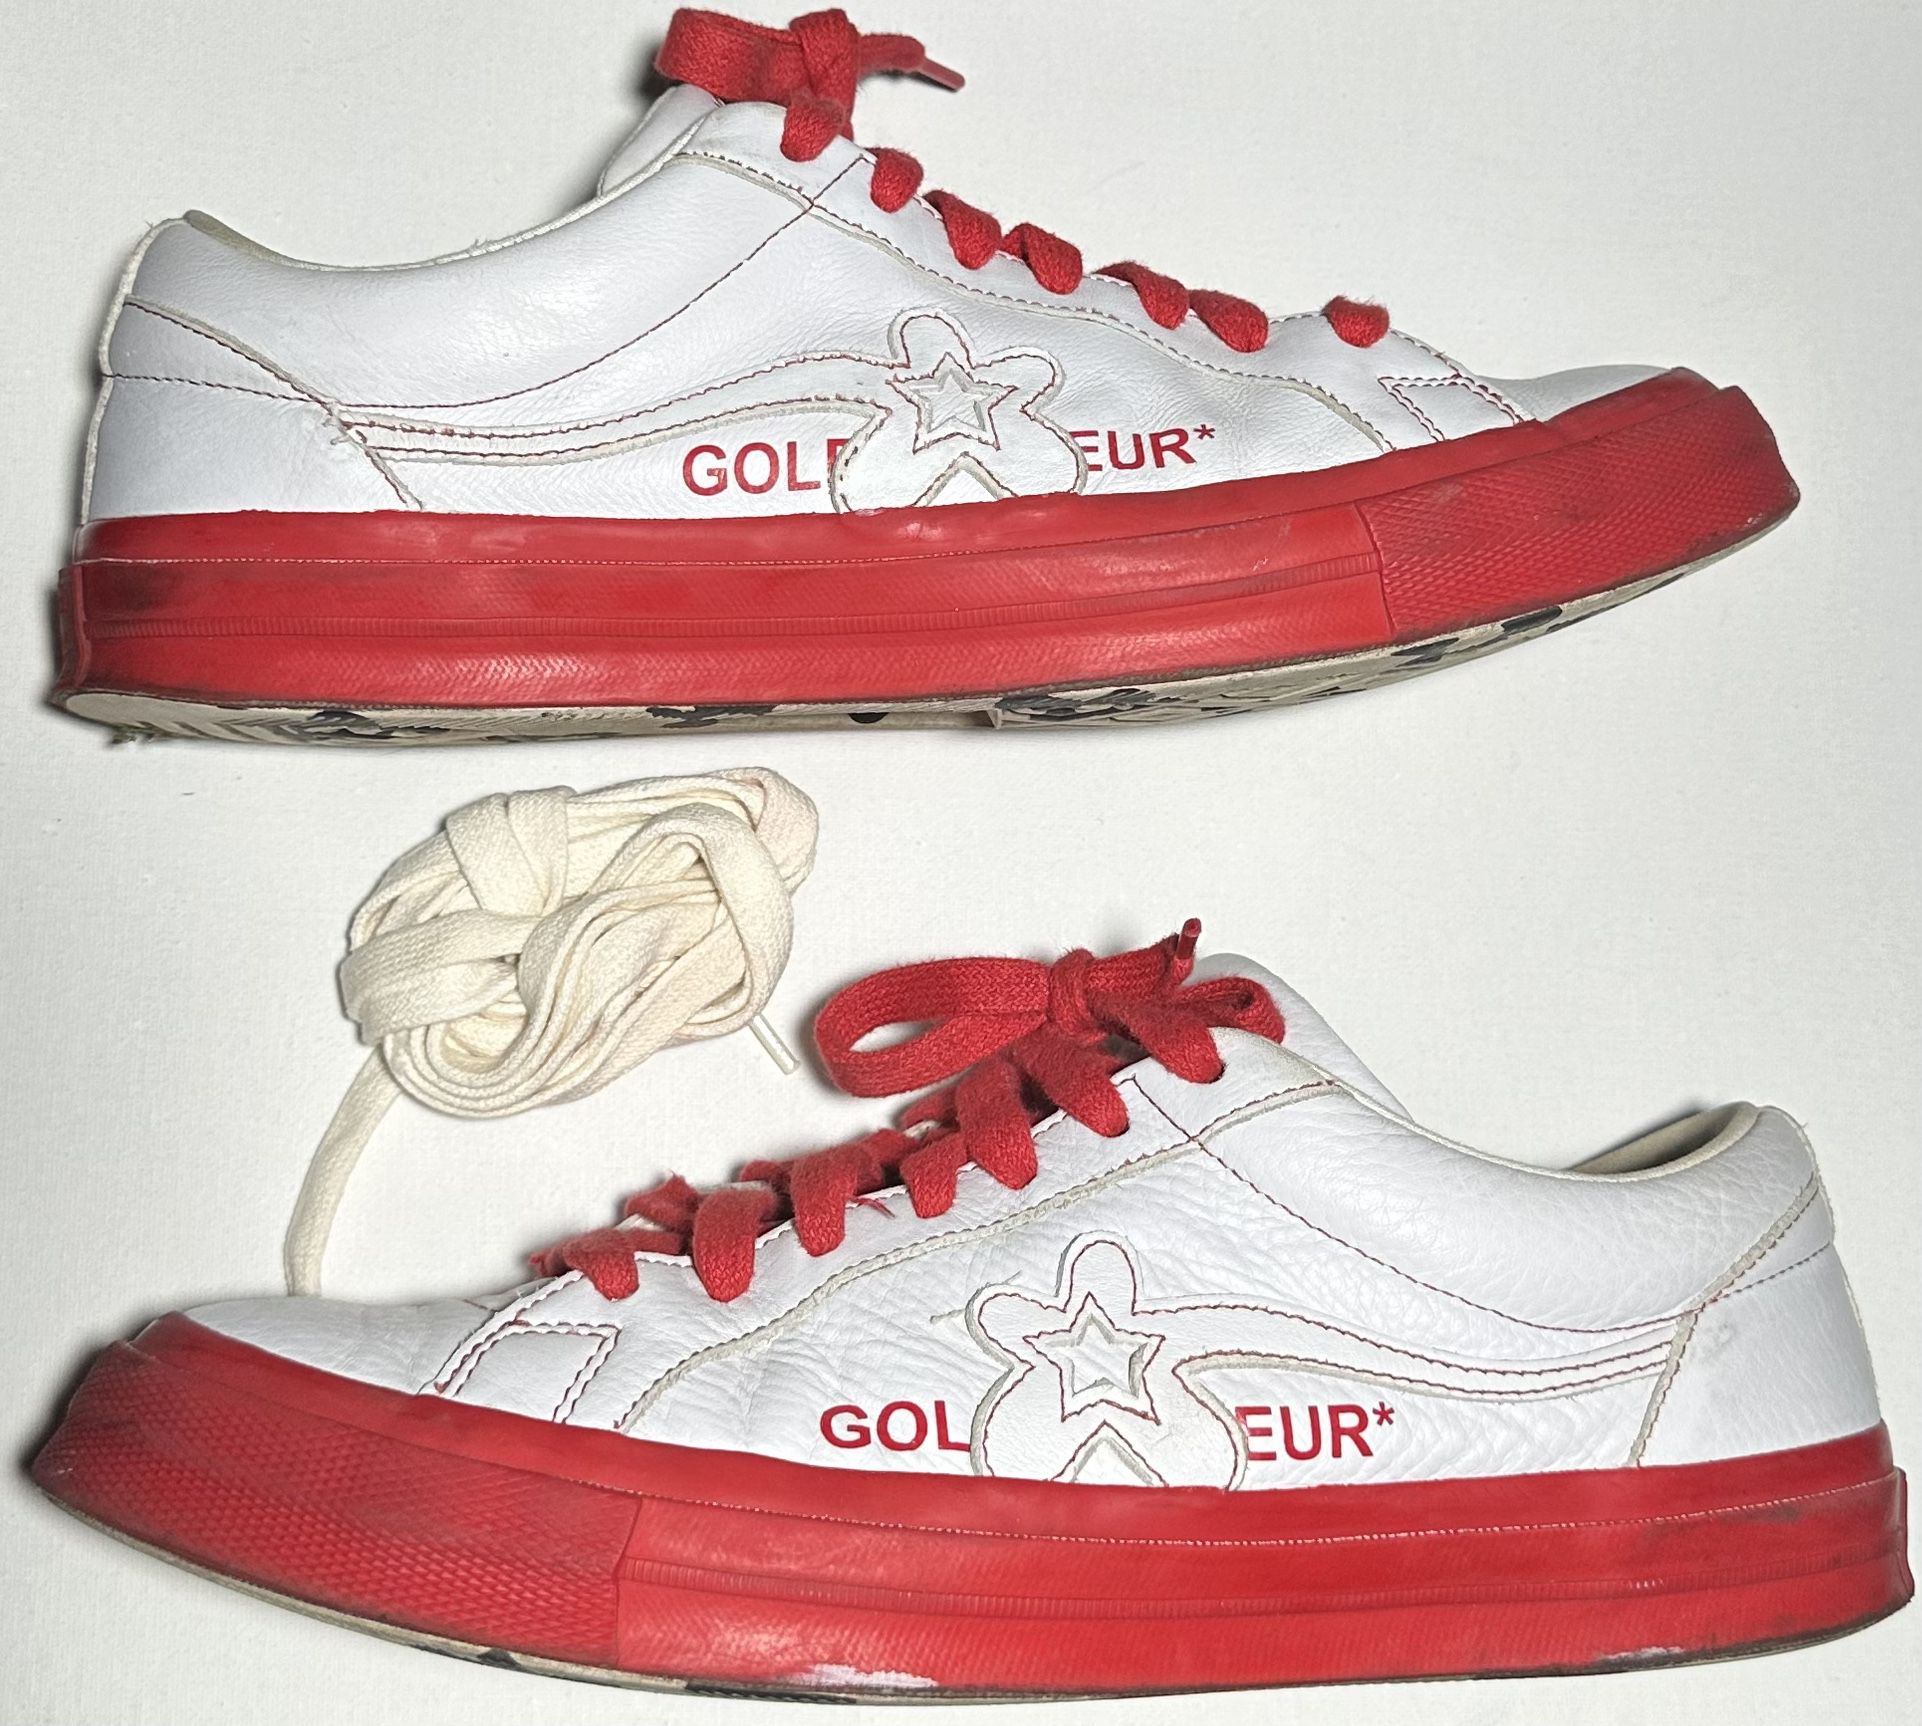 Golf Le Fleur X Converse One Star Ox “Racing Red” (2019)